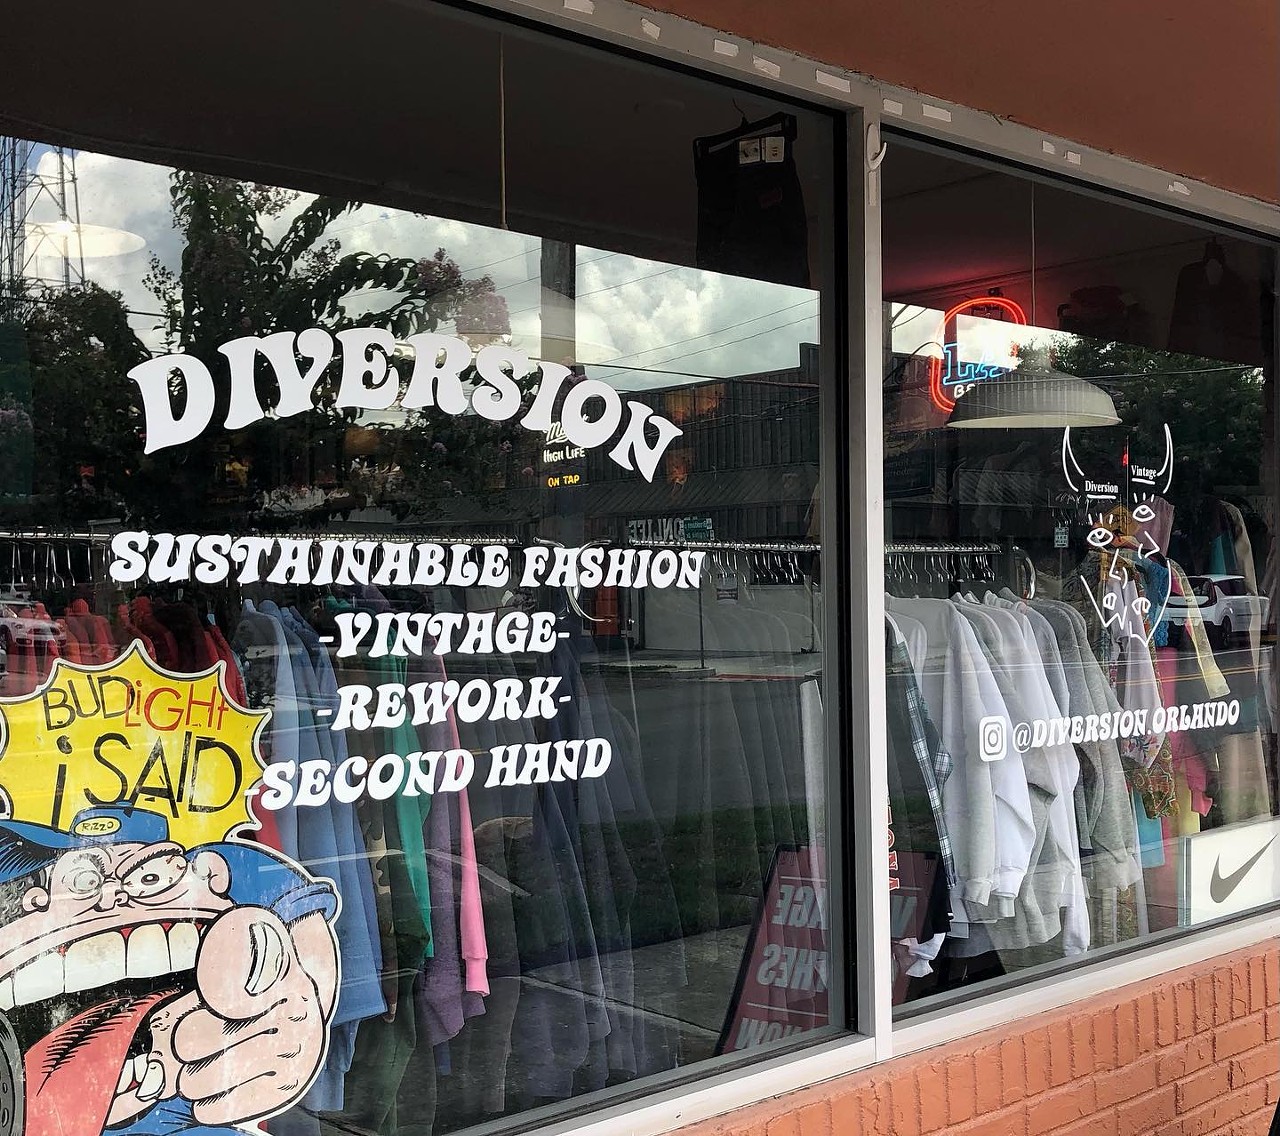 Diversion
823 Virginia Drive, Orlando
A modern thrift store specializing in vintage clothing, with a sick collection of printed T-shirts.